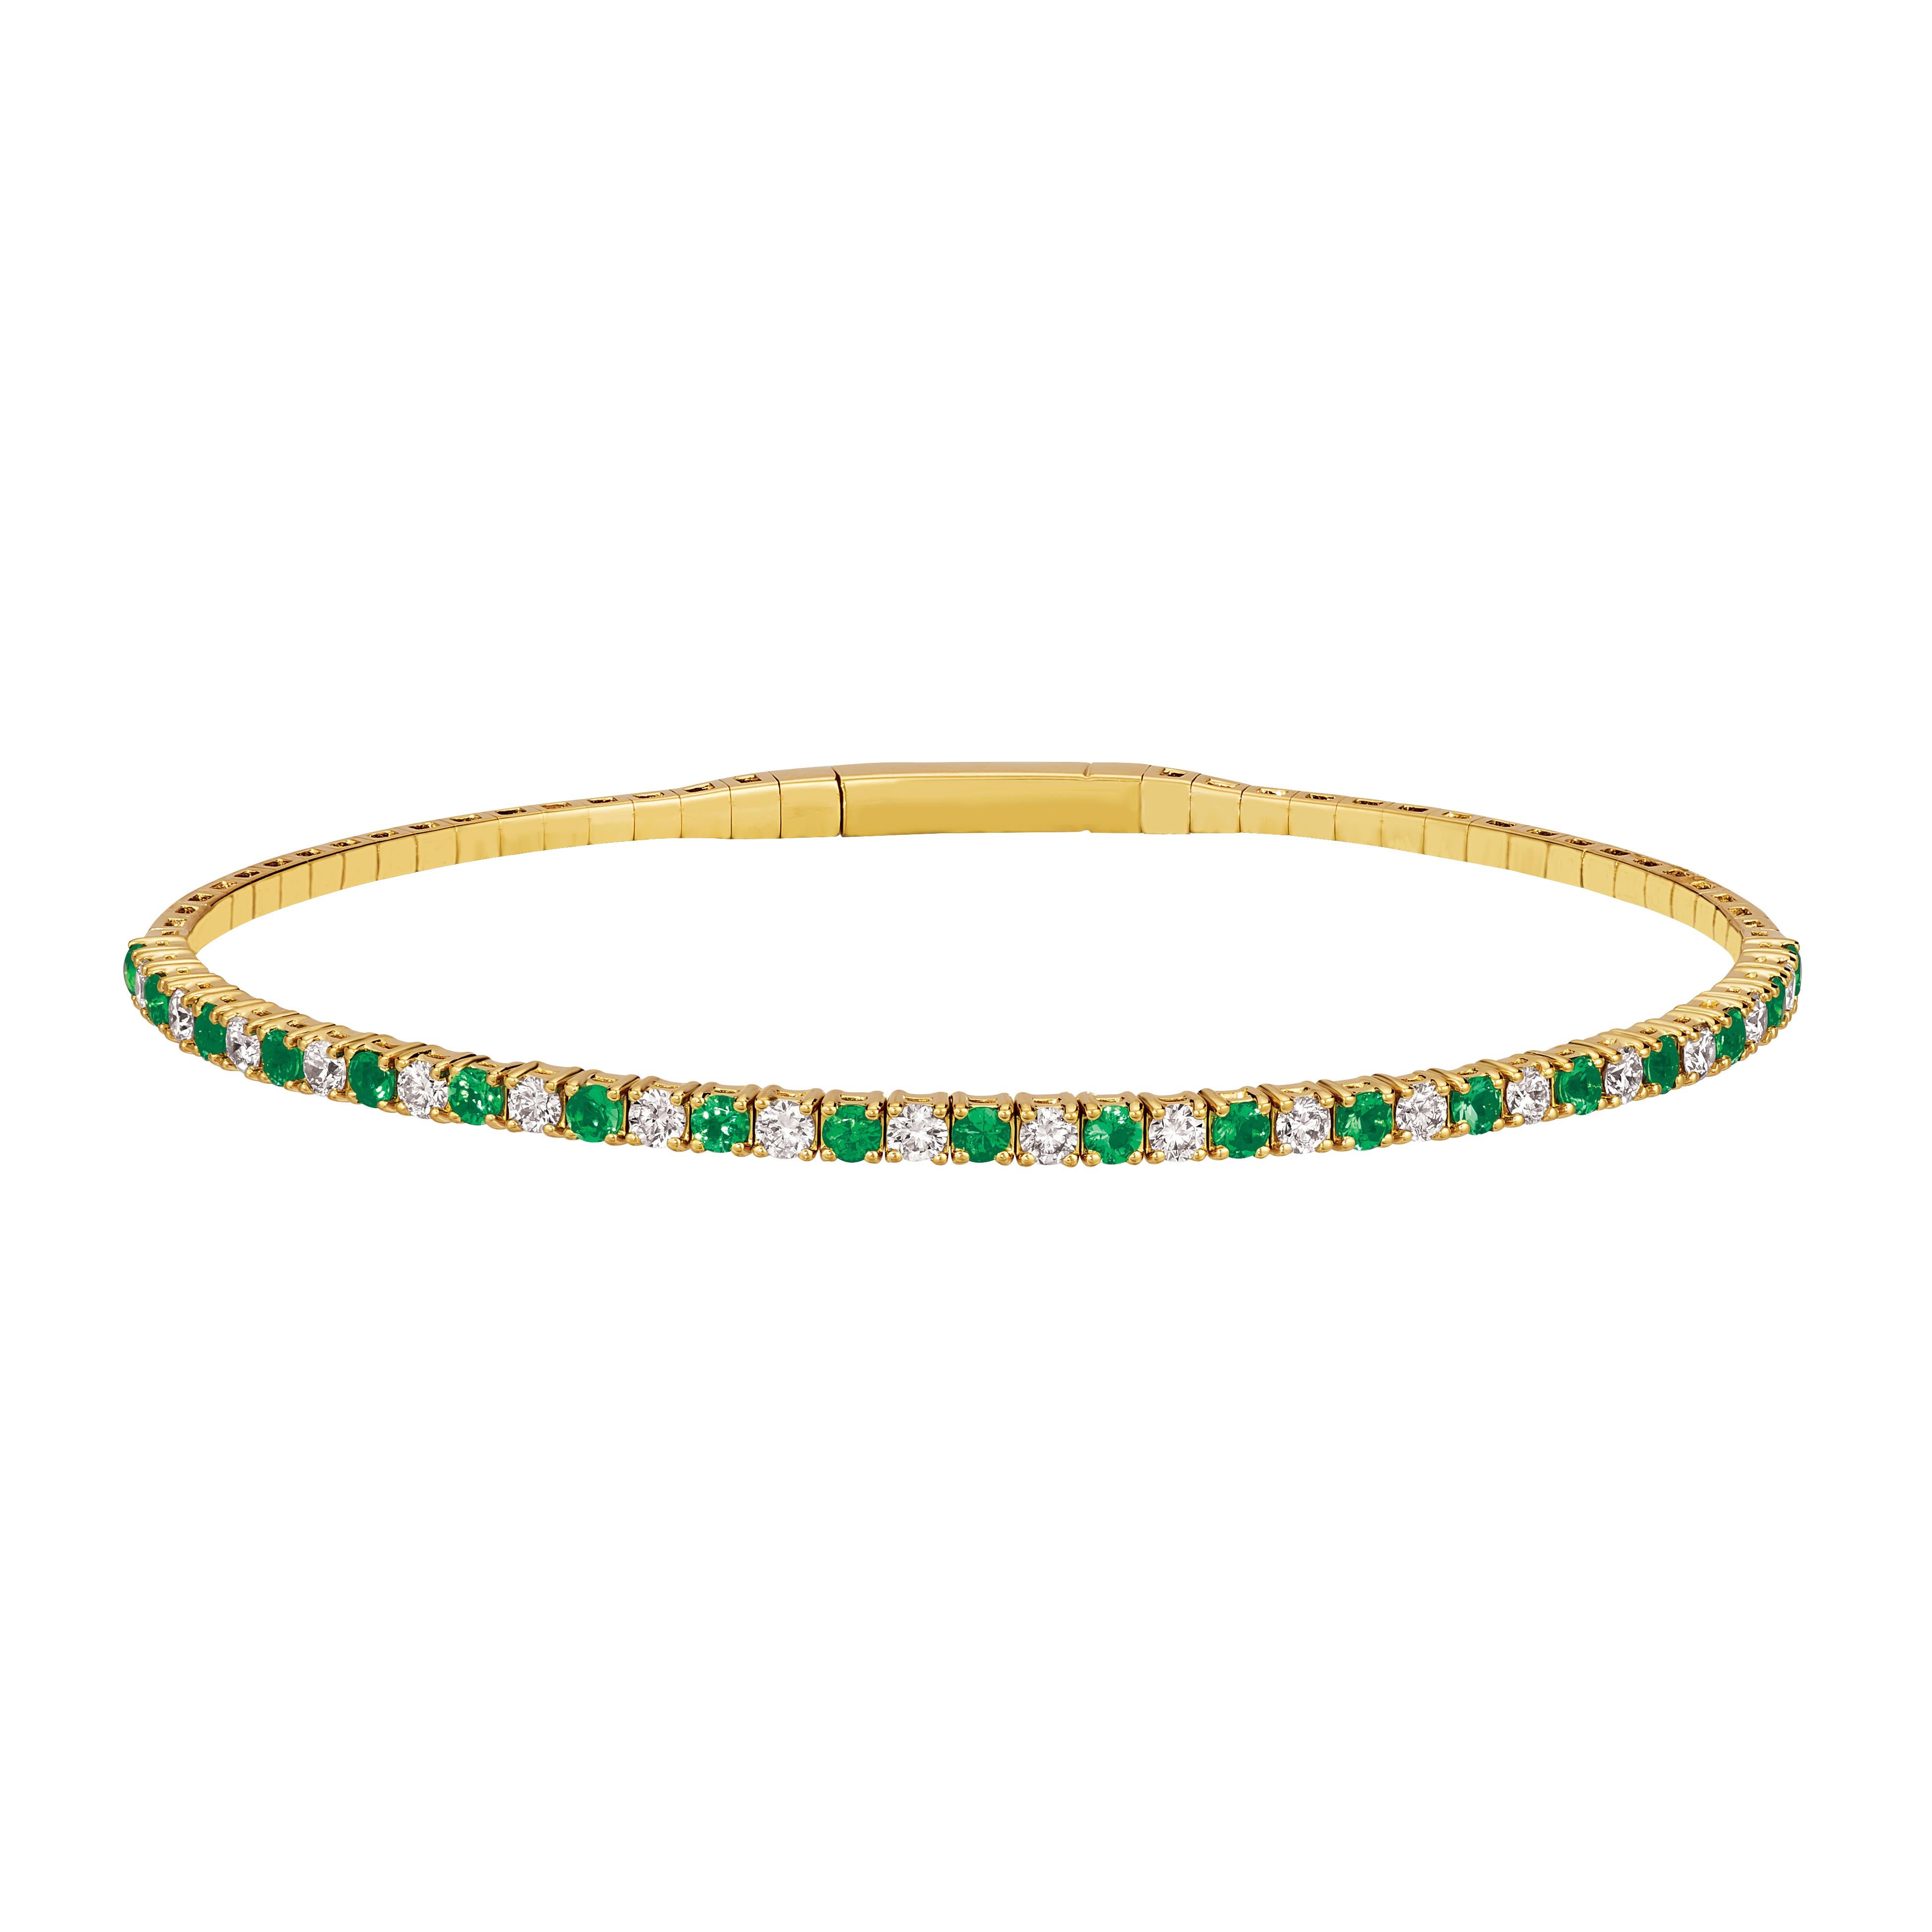 1.78 Carat Natural Diamond and Emerald Flexible Half Way Round Bangle Bracelet G SI 14K Yellow Gold 7''

100% Natural Diamonds and Emeralds
1.78CT
G-H 
SI  
14K Yellow Gold, 5.3 gram, Pave
7 inches in length, 1/10 inch in width
0.72ct diamonds  and